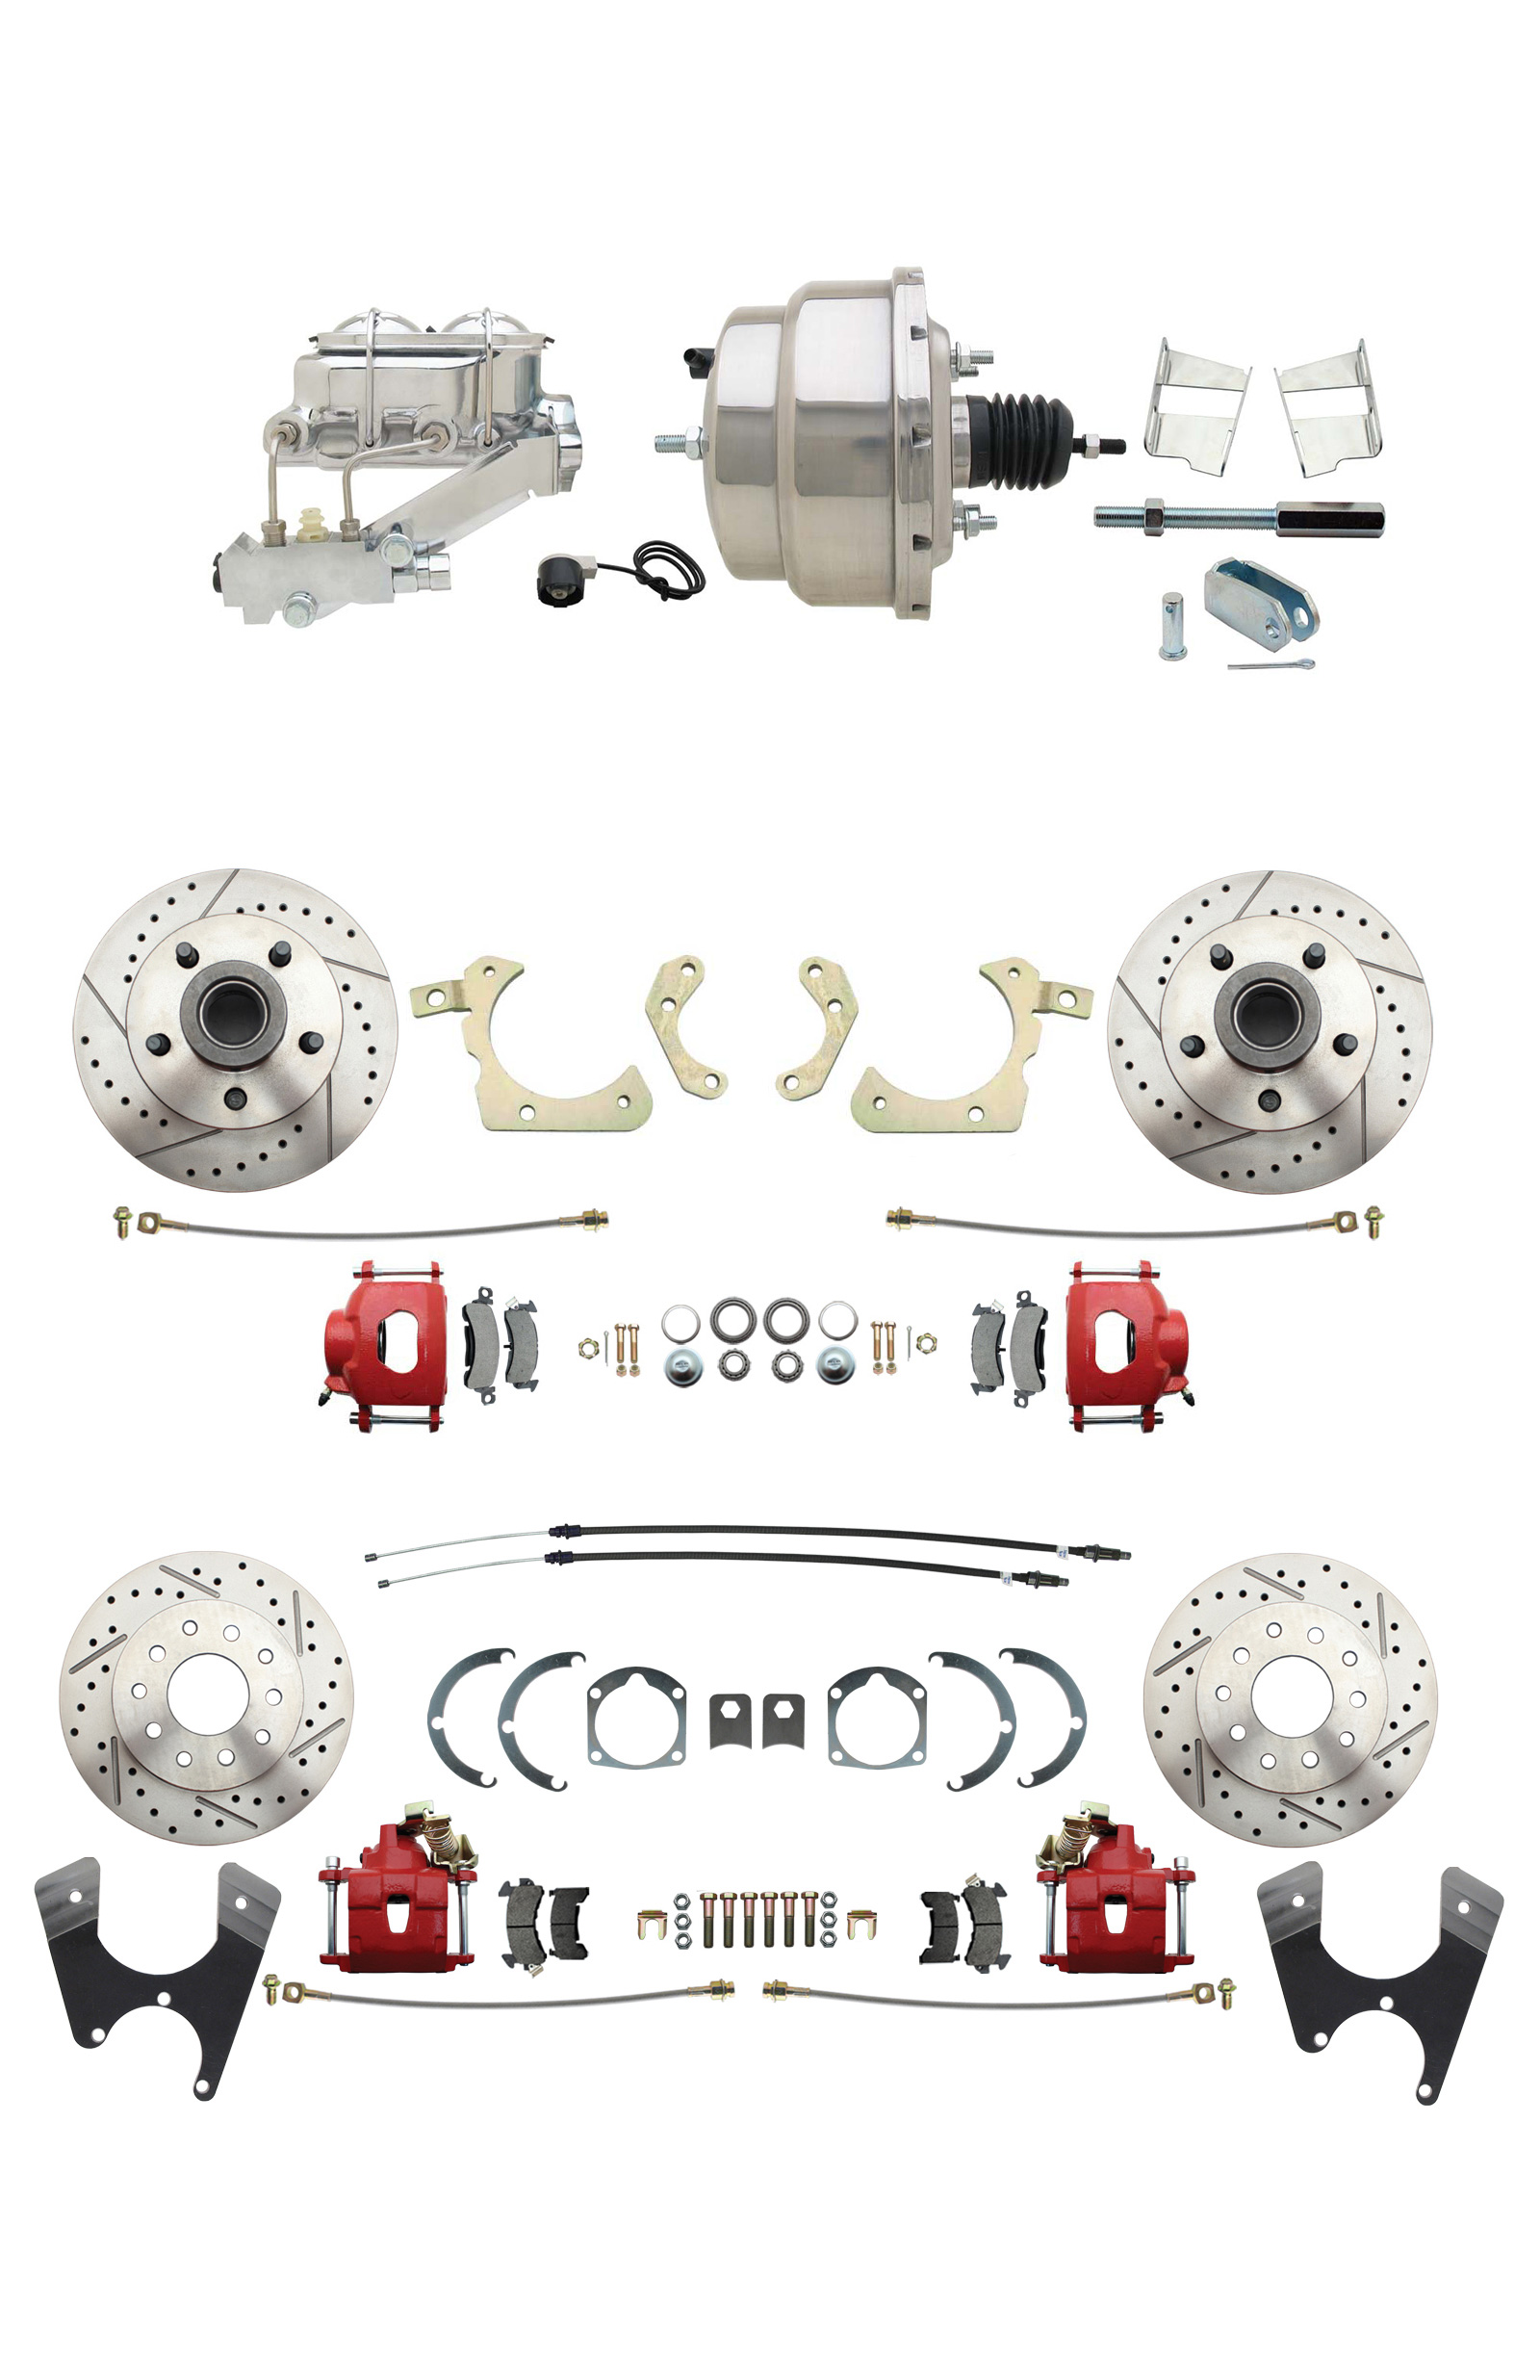 1959-1964 GM Full Size Front & Rear Power Disc Brake Kit Red Powder Coated Calipers Drilled/Slotted Rotors (Impala, Bel Air, Biscayne) & 8 Dual Chrome Booster Conversion Kit W/ Chrome Master Cylinder Left Mount Disc/ Dr